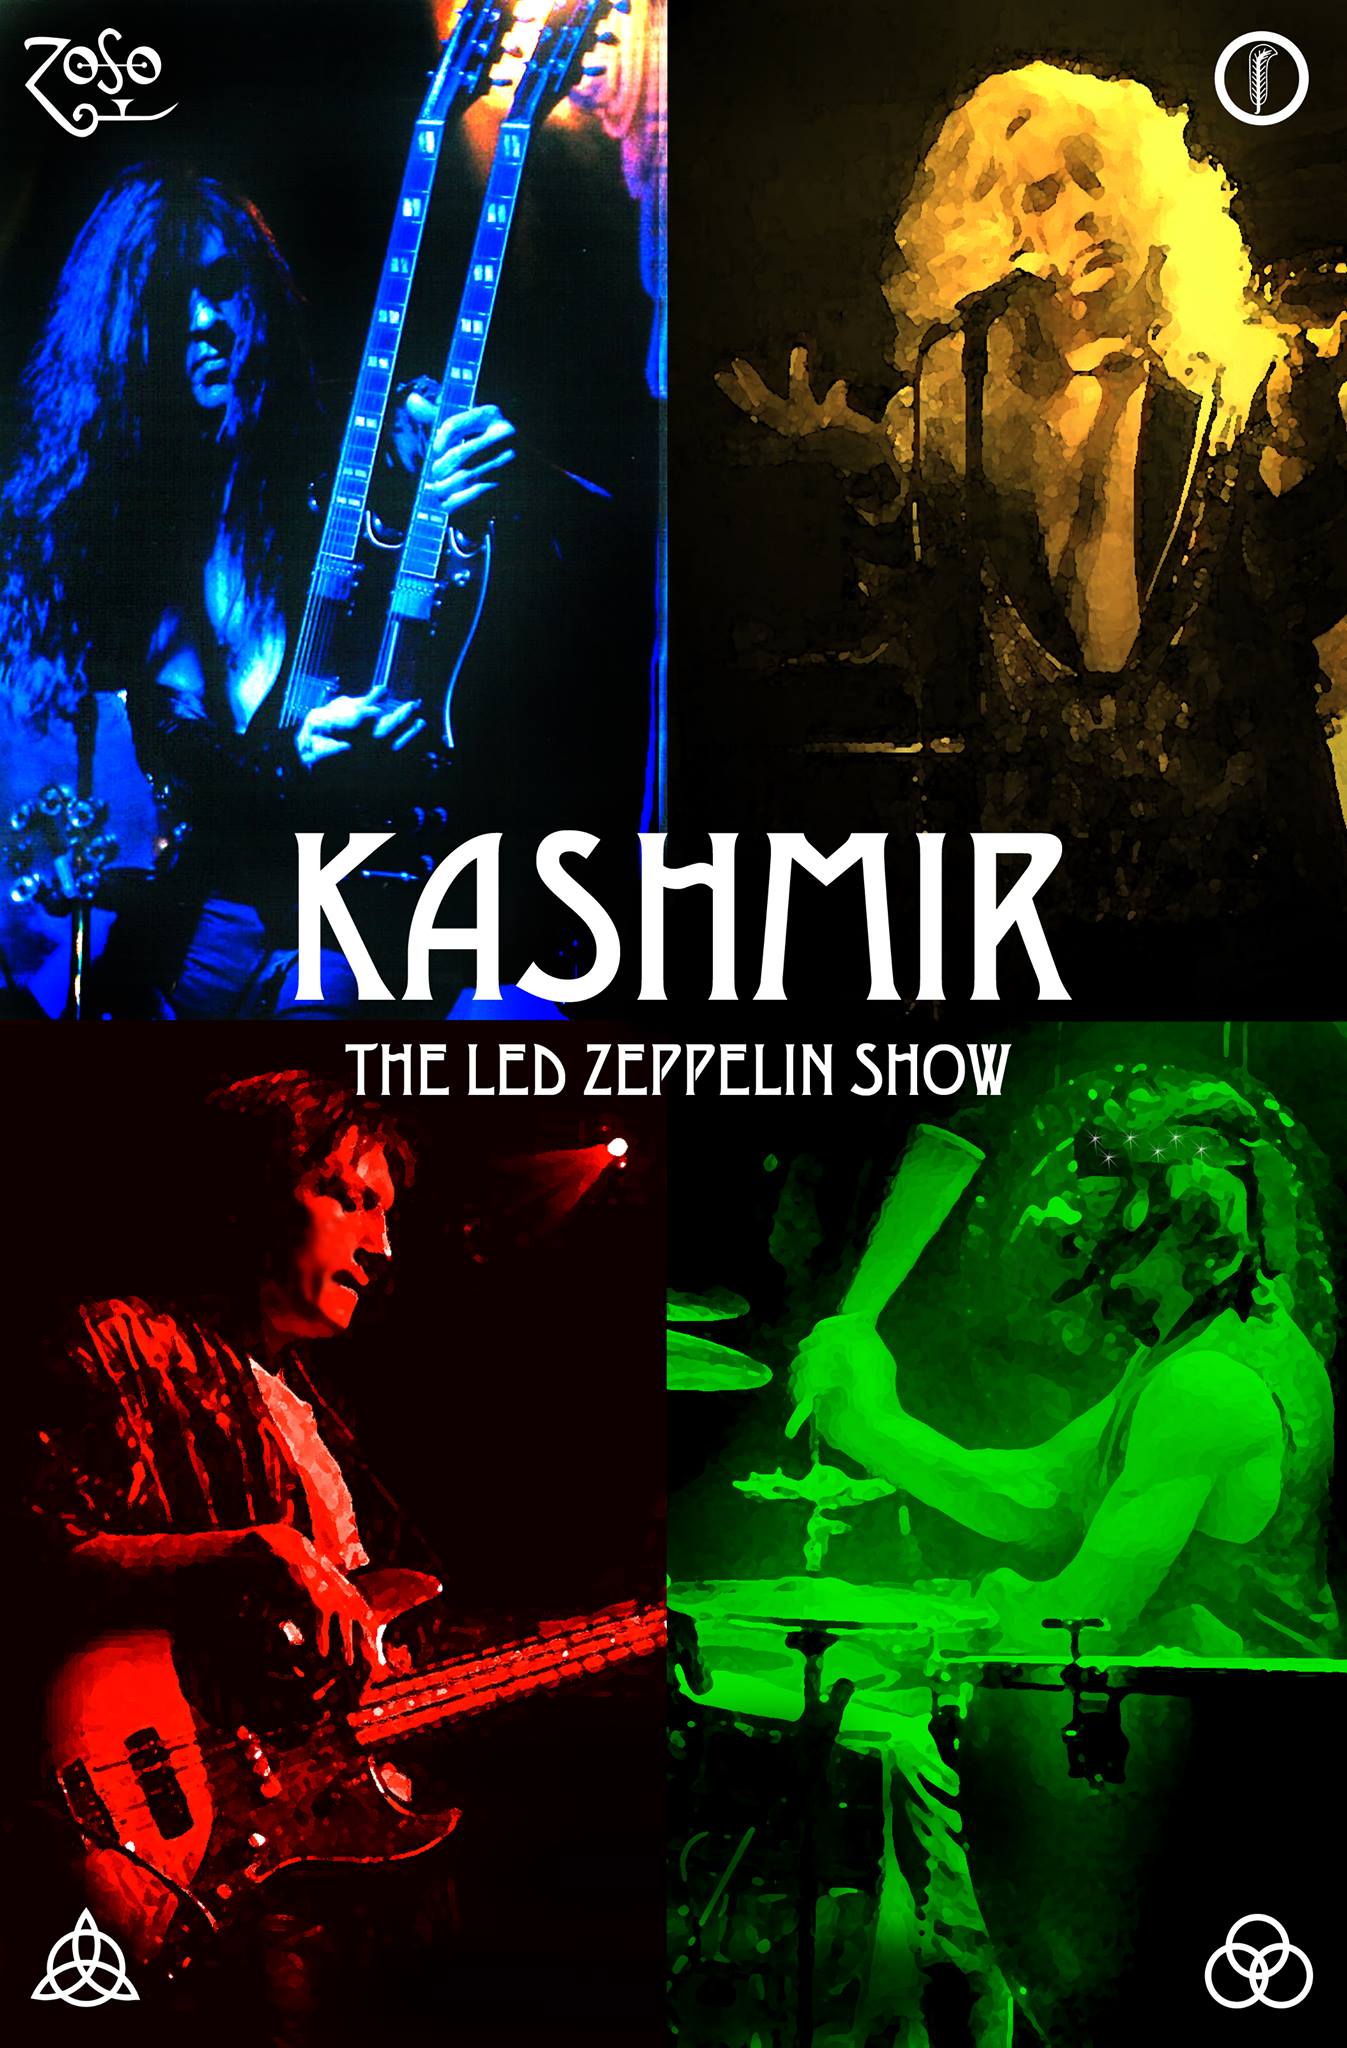 Whole Lotta Love Concert with Kashmir, The Ultimate Led Zeppelin Experience Tribute Band!